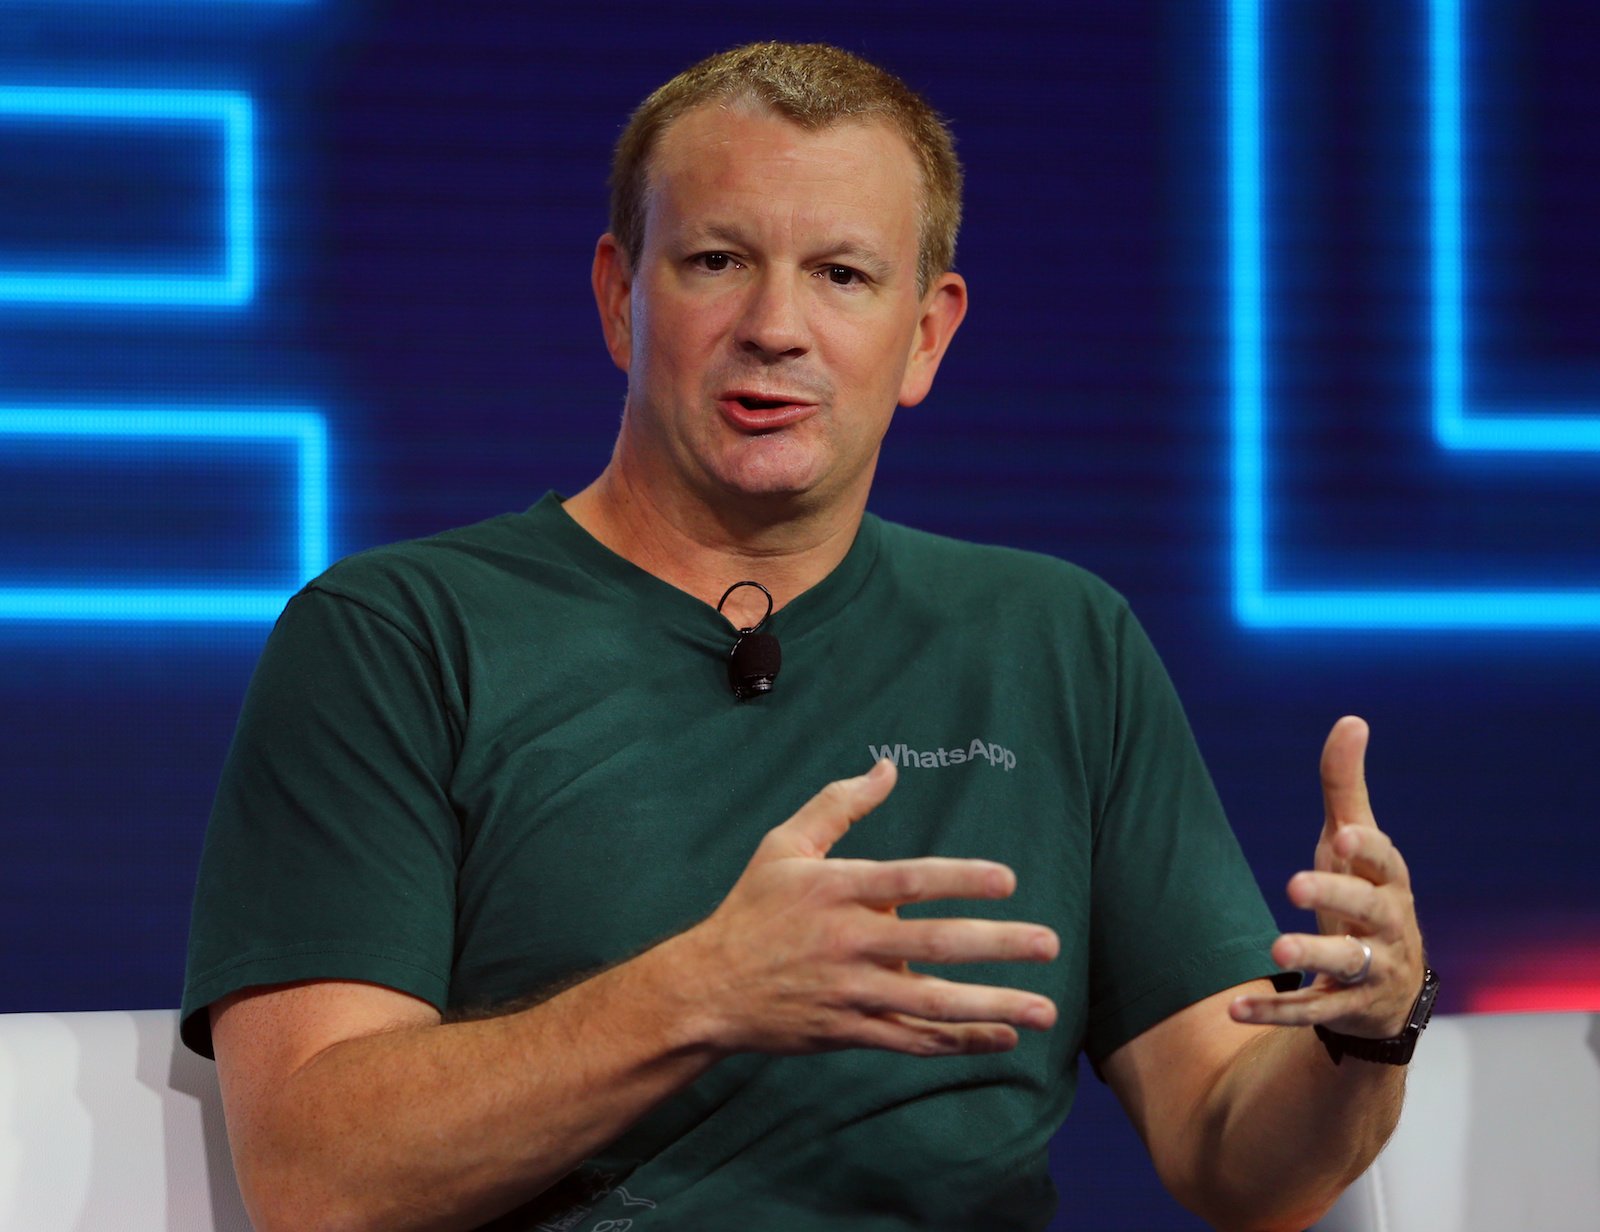   WhatsApp co-founder wants everyone to delete their Facebook accounts...